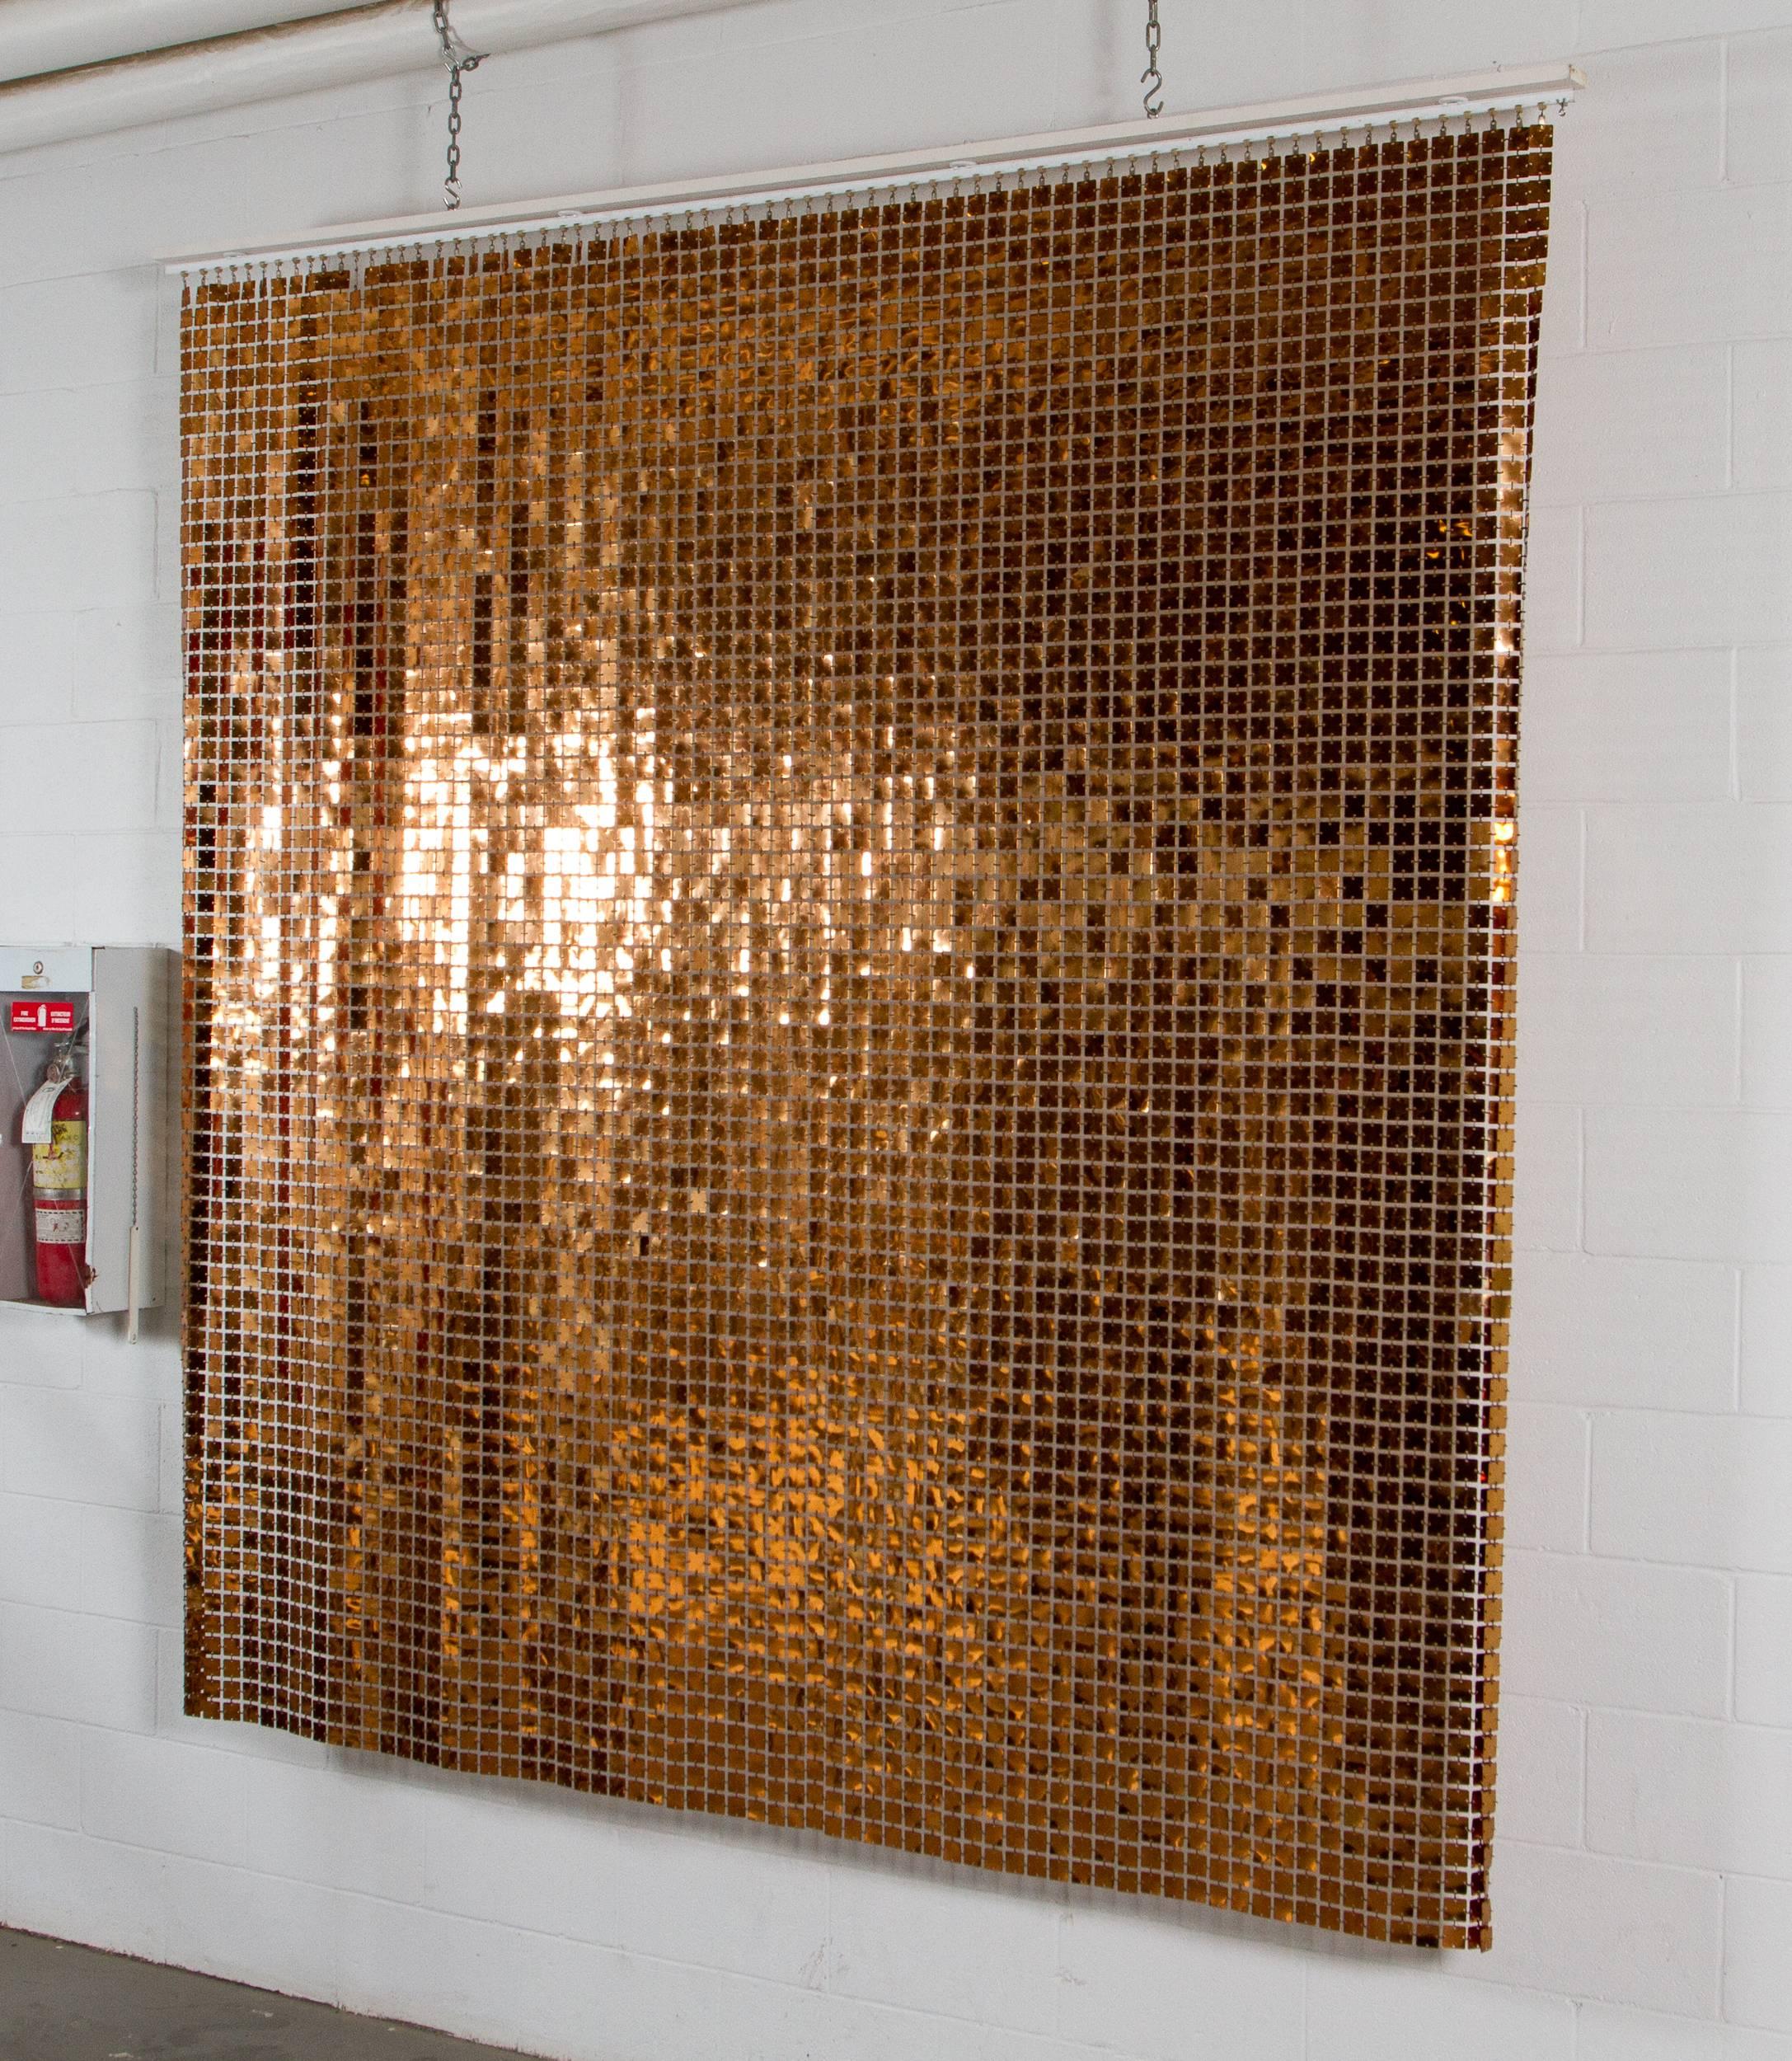 Copper color space curtain by Paco Rabanne made of linked plasticized copper squares. This curtain is of the same period and design as his famous dresses made in the 1970s.